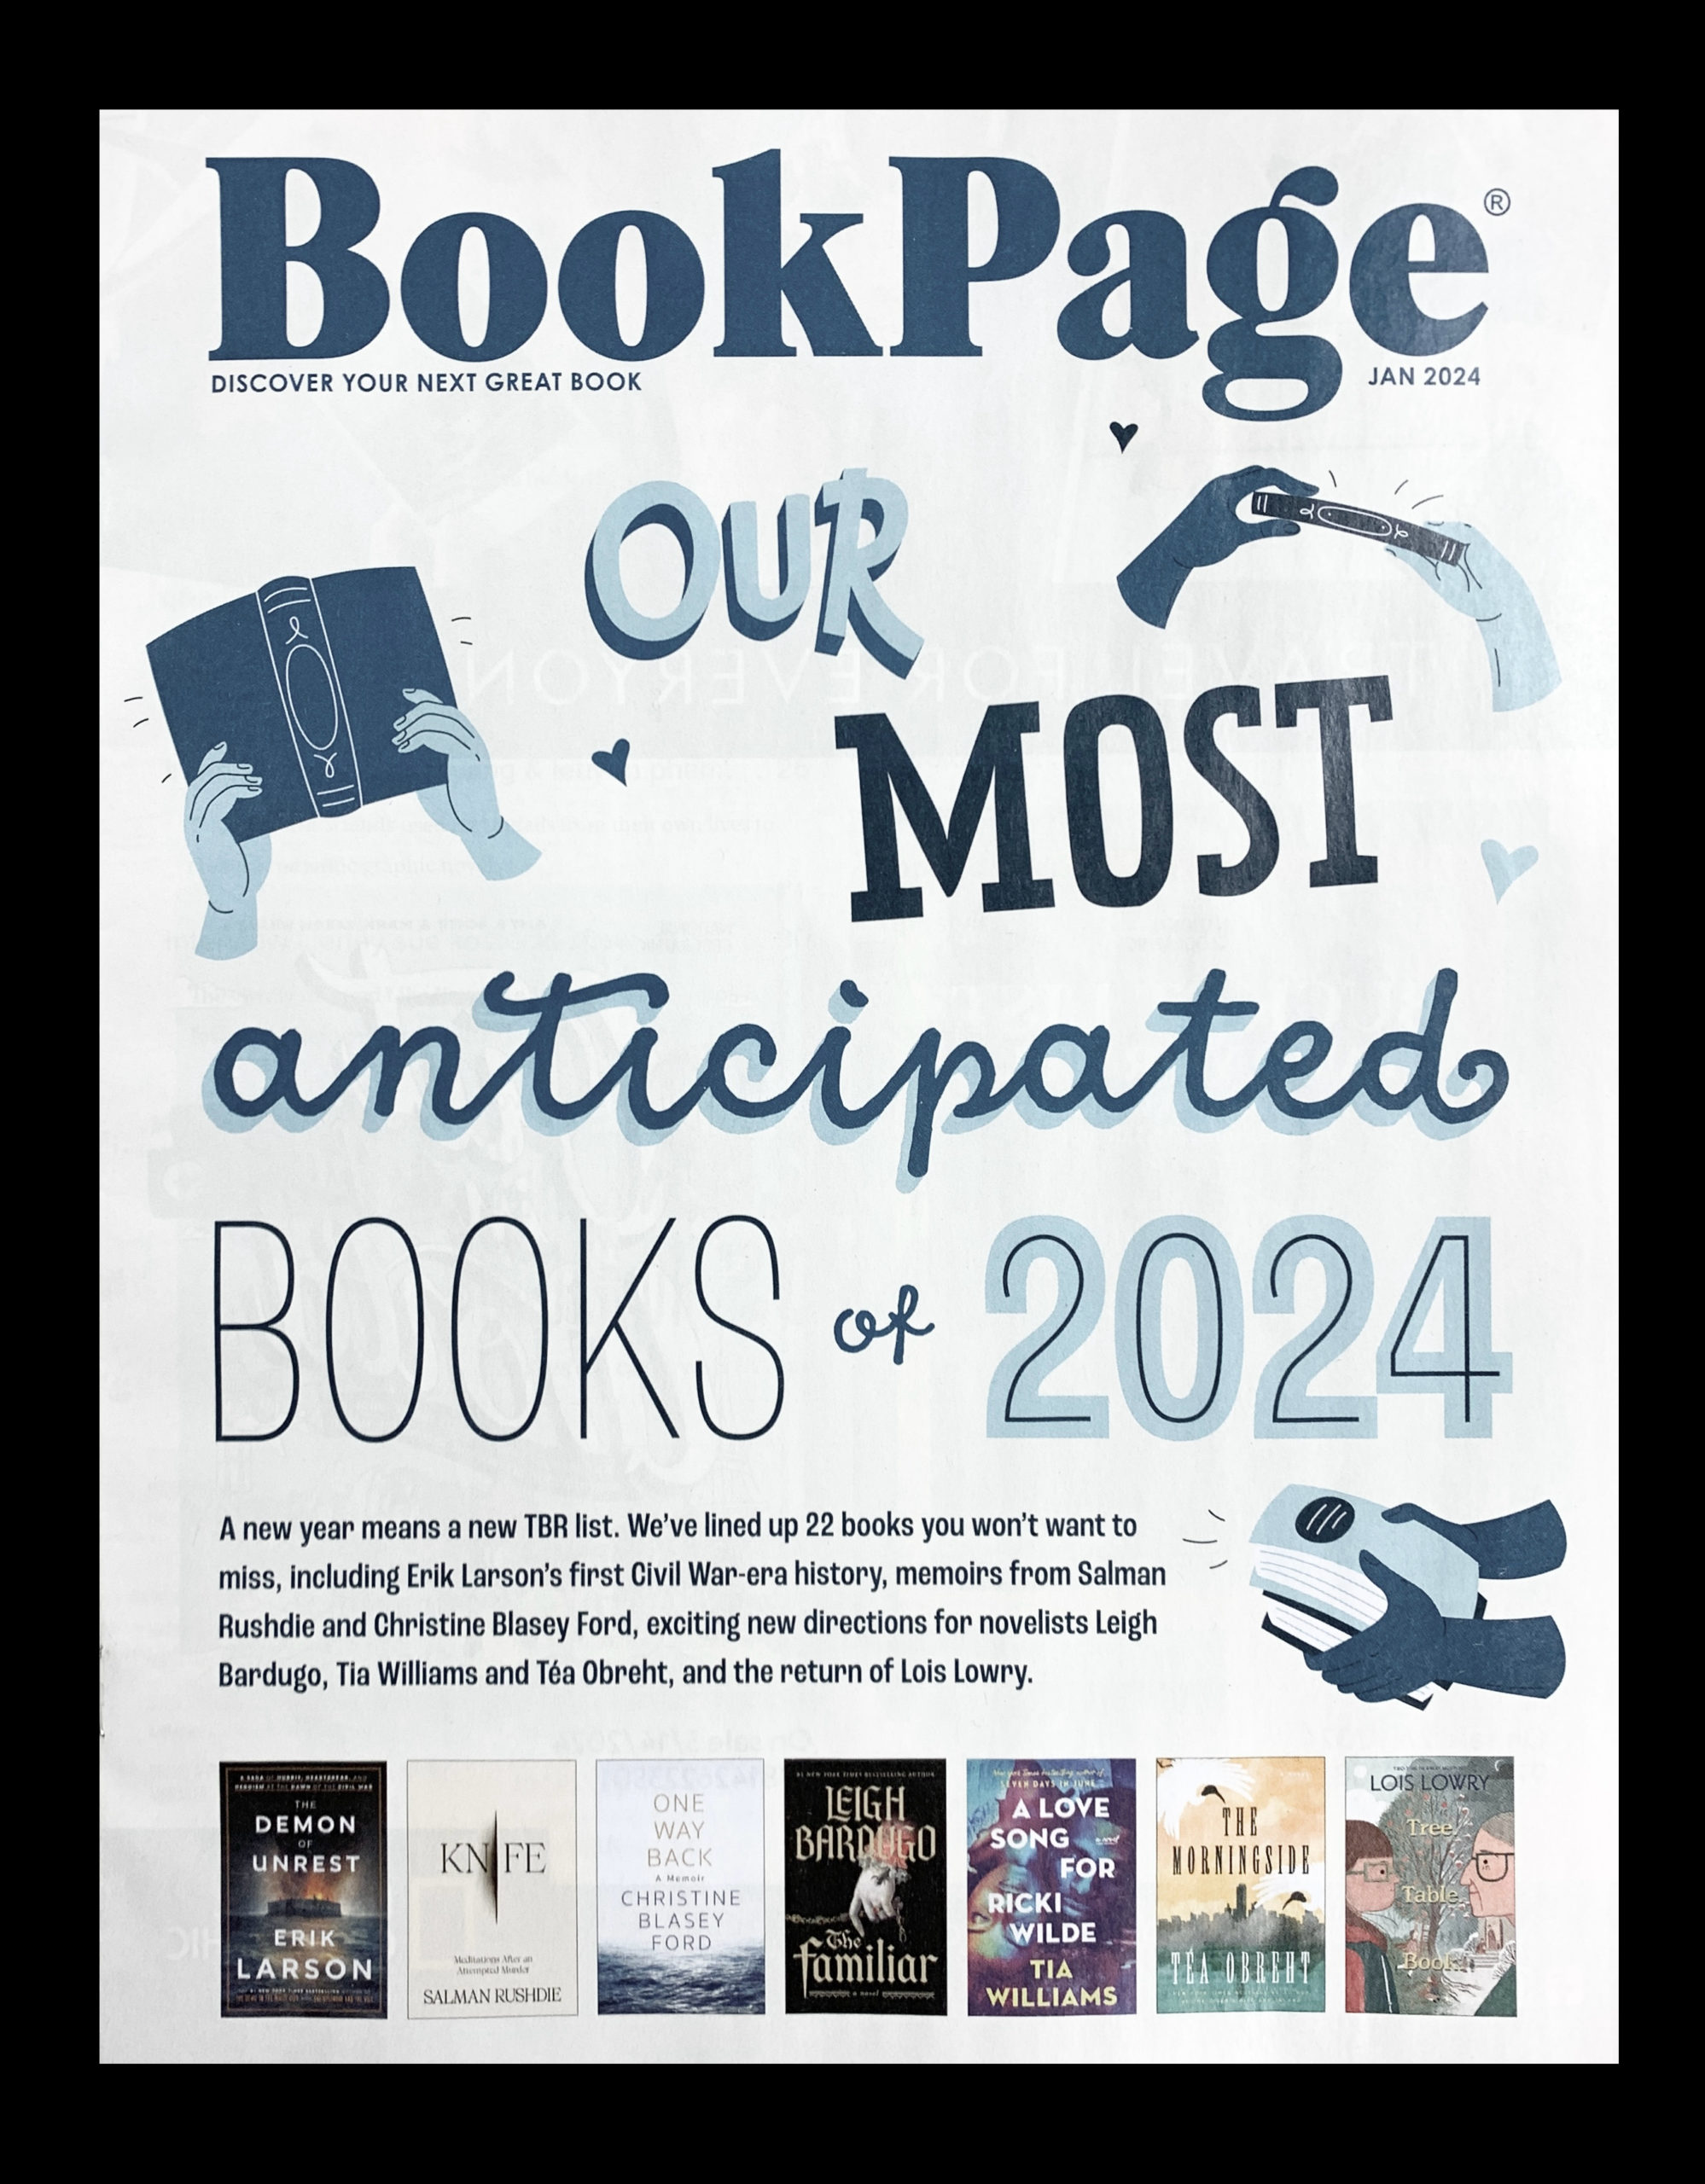 BookPage and Reading Recommendations Available at MPL